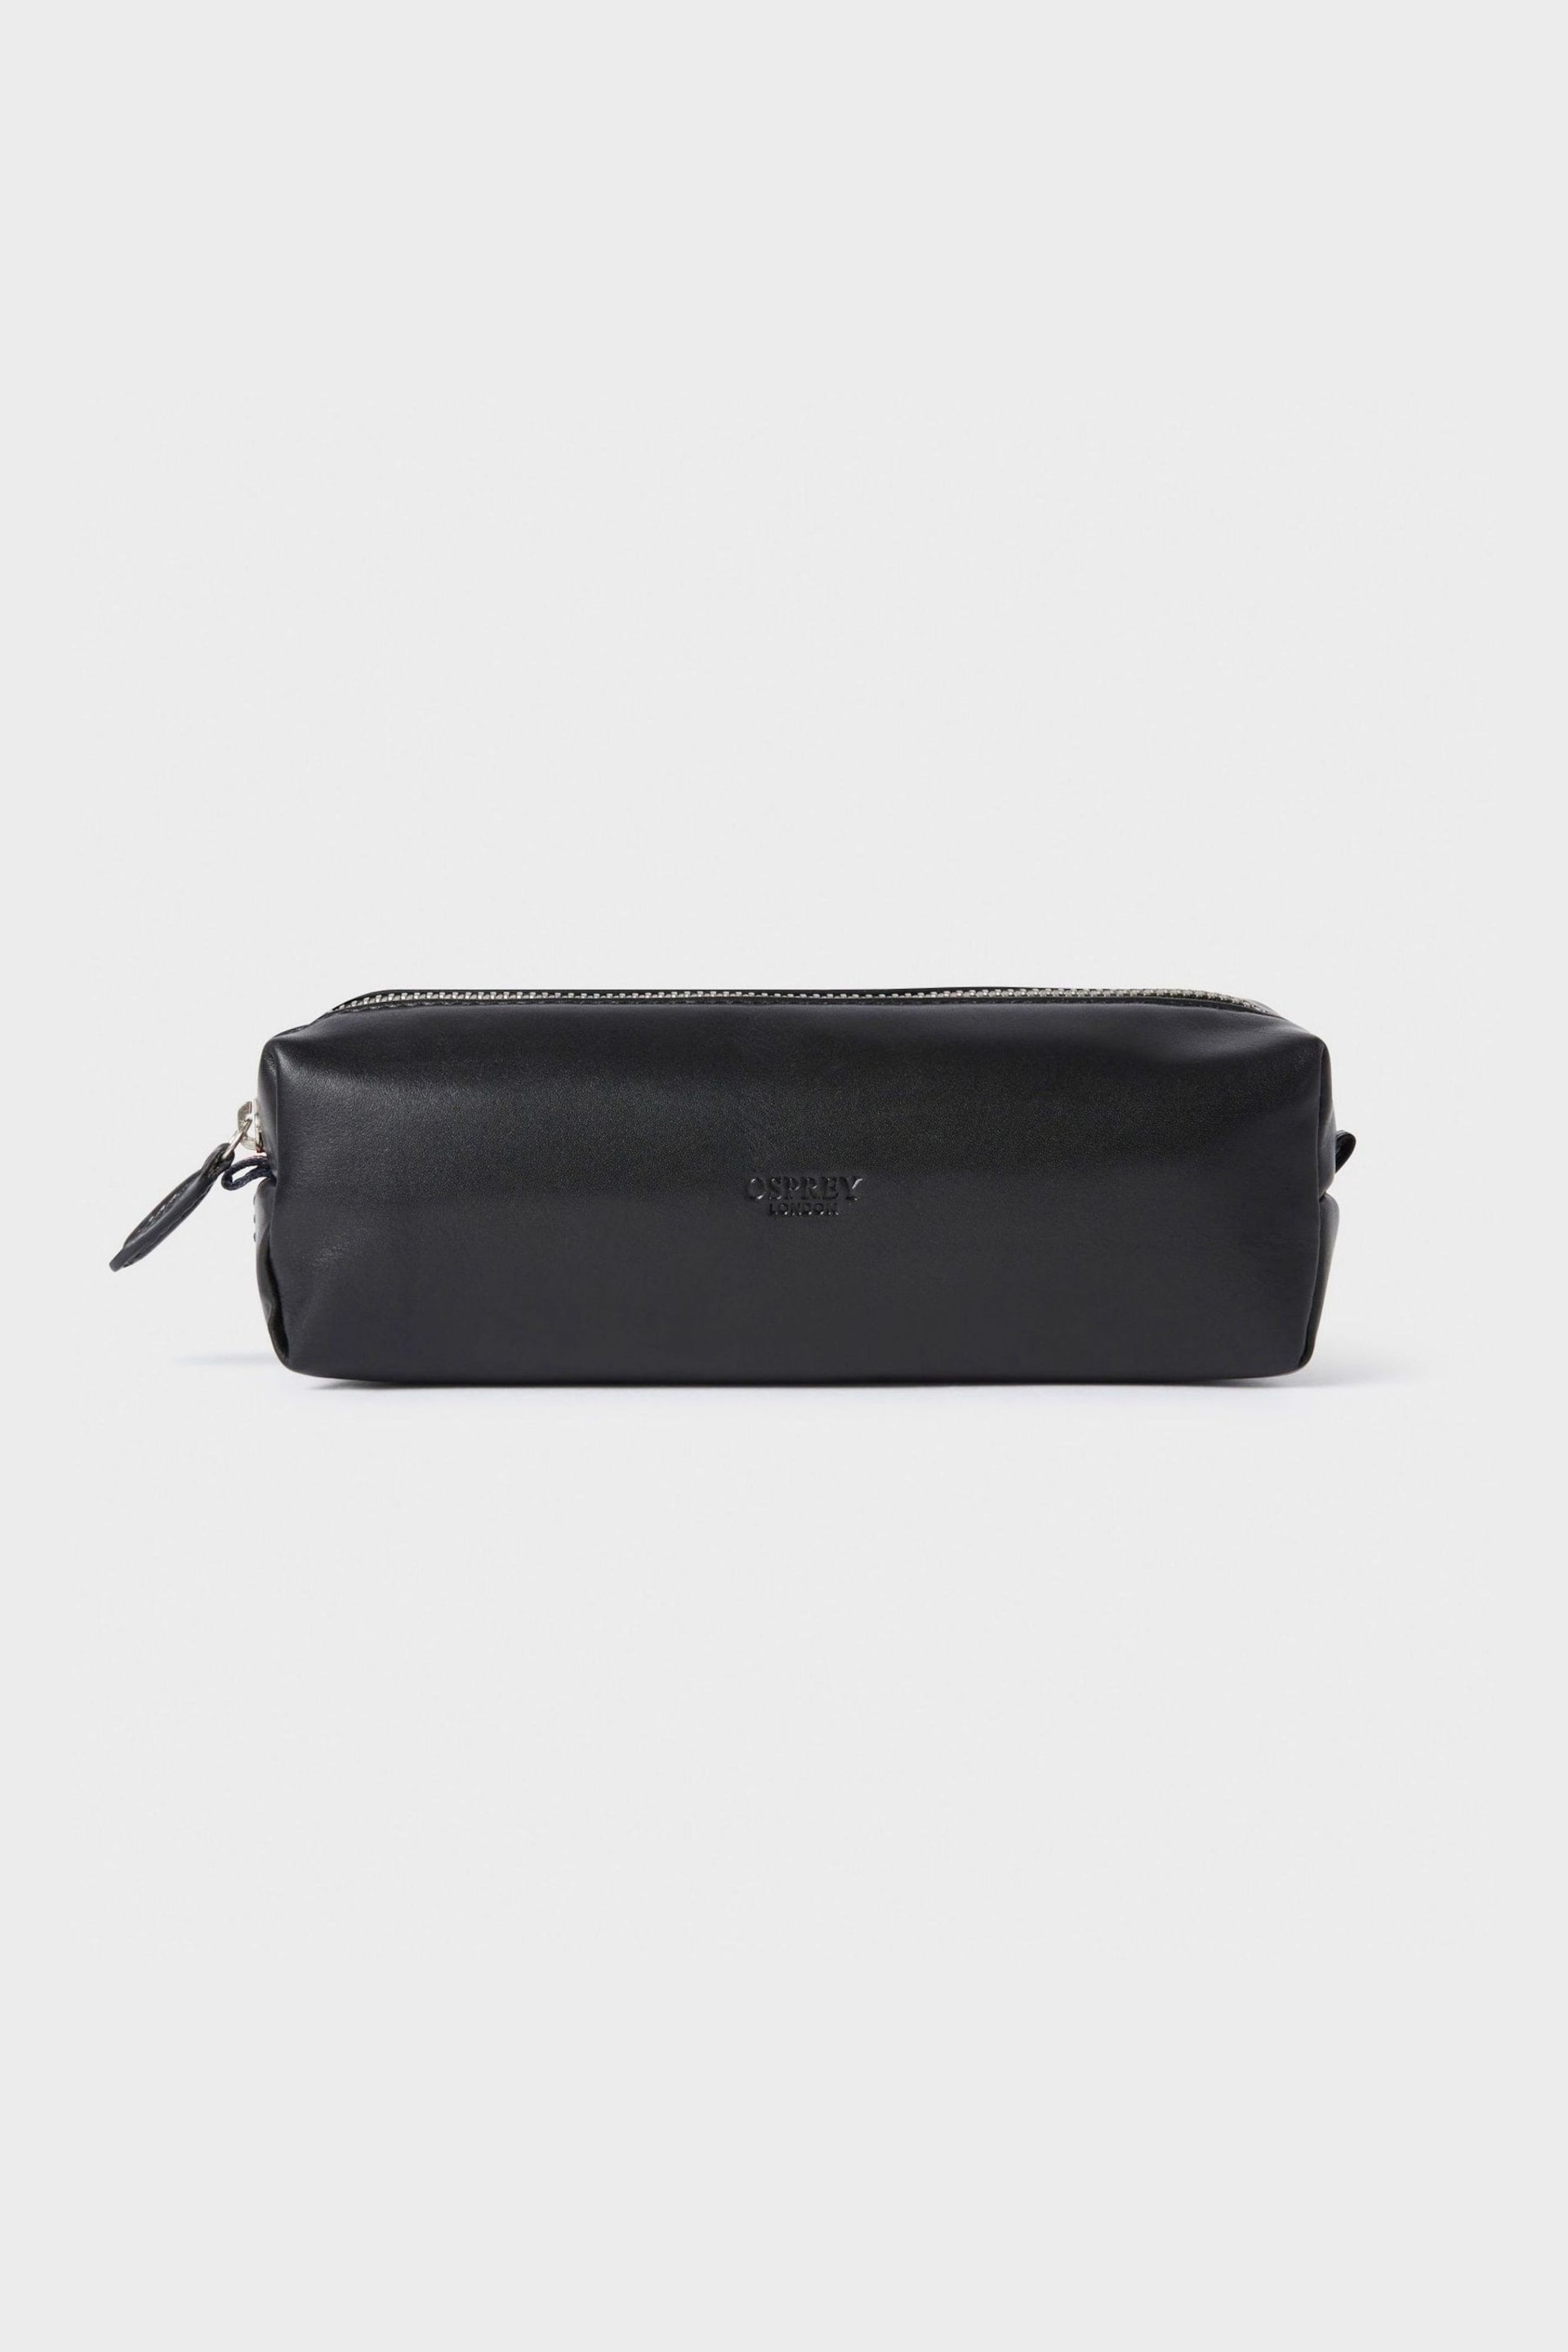 OSPREY LONDON The Leather Pencil Case - Image 2 of 5